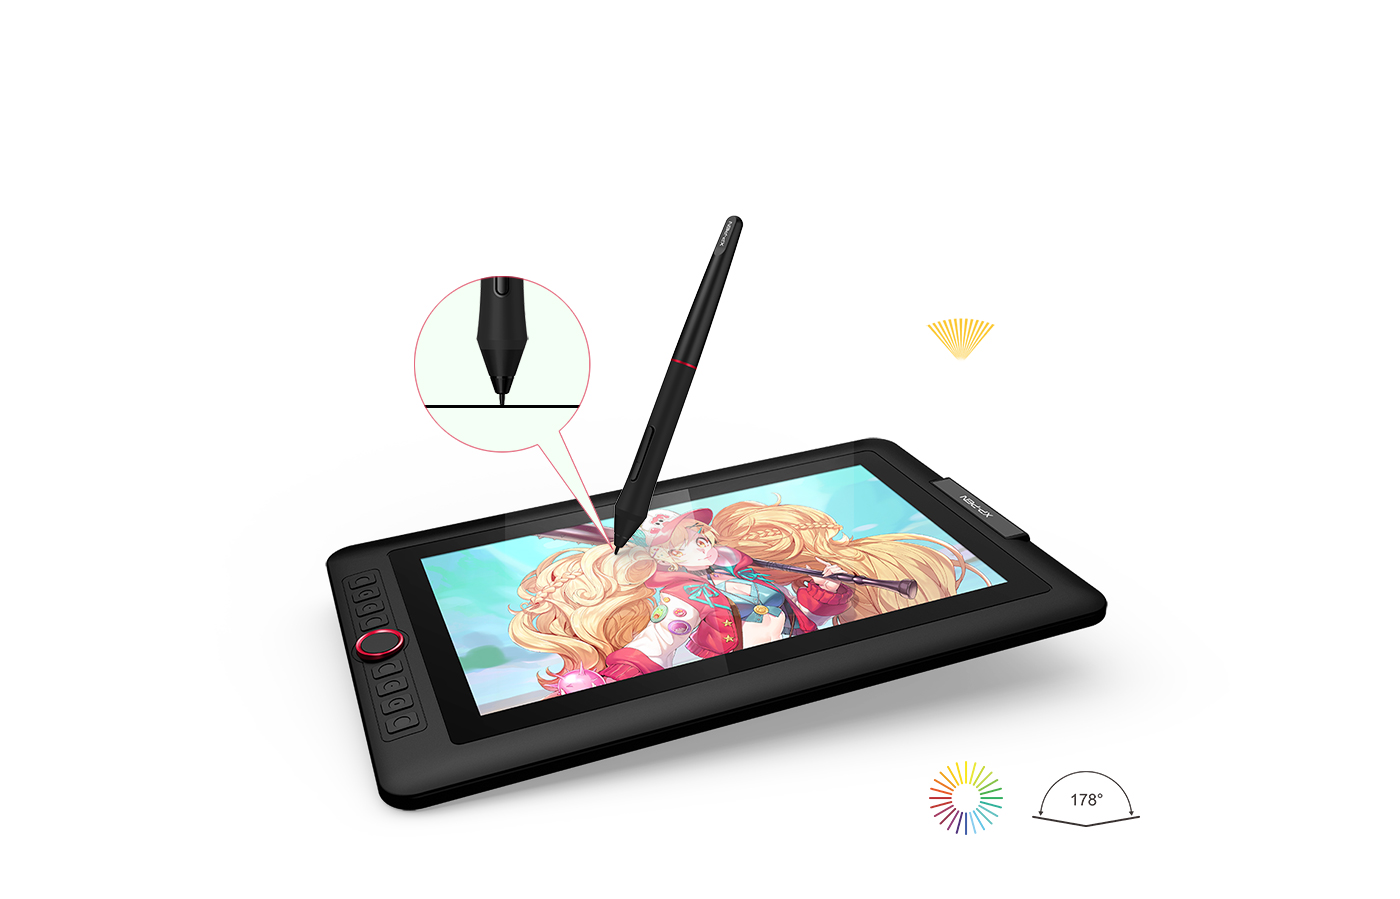 XP-Pen Artist 13.3 Pro art drawing tablet Features fully-laminated Display with 88% NTSC color gamut